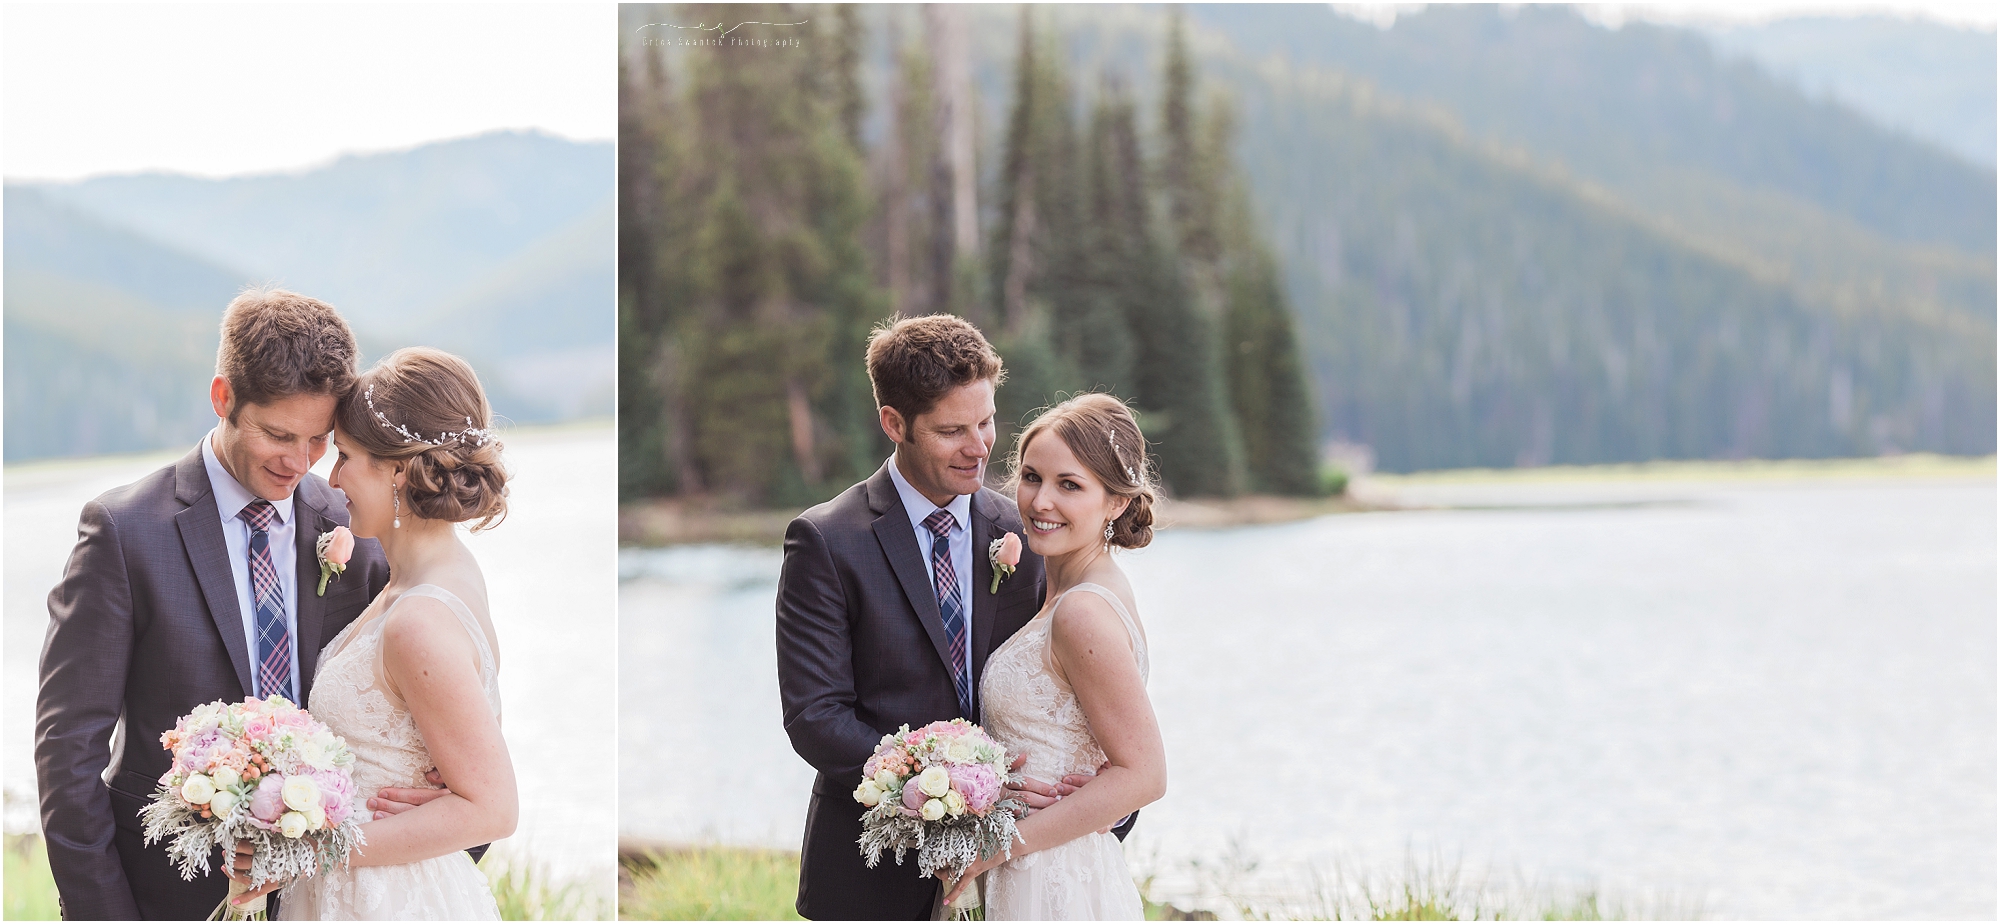 Formal bride and groom photos at this intimate outdoor Oregon wedding at Sparks Lake near Bend. 